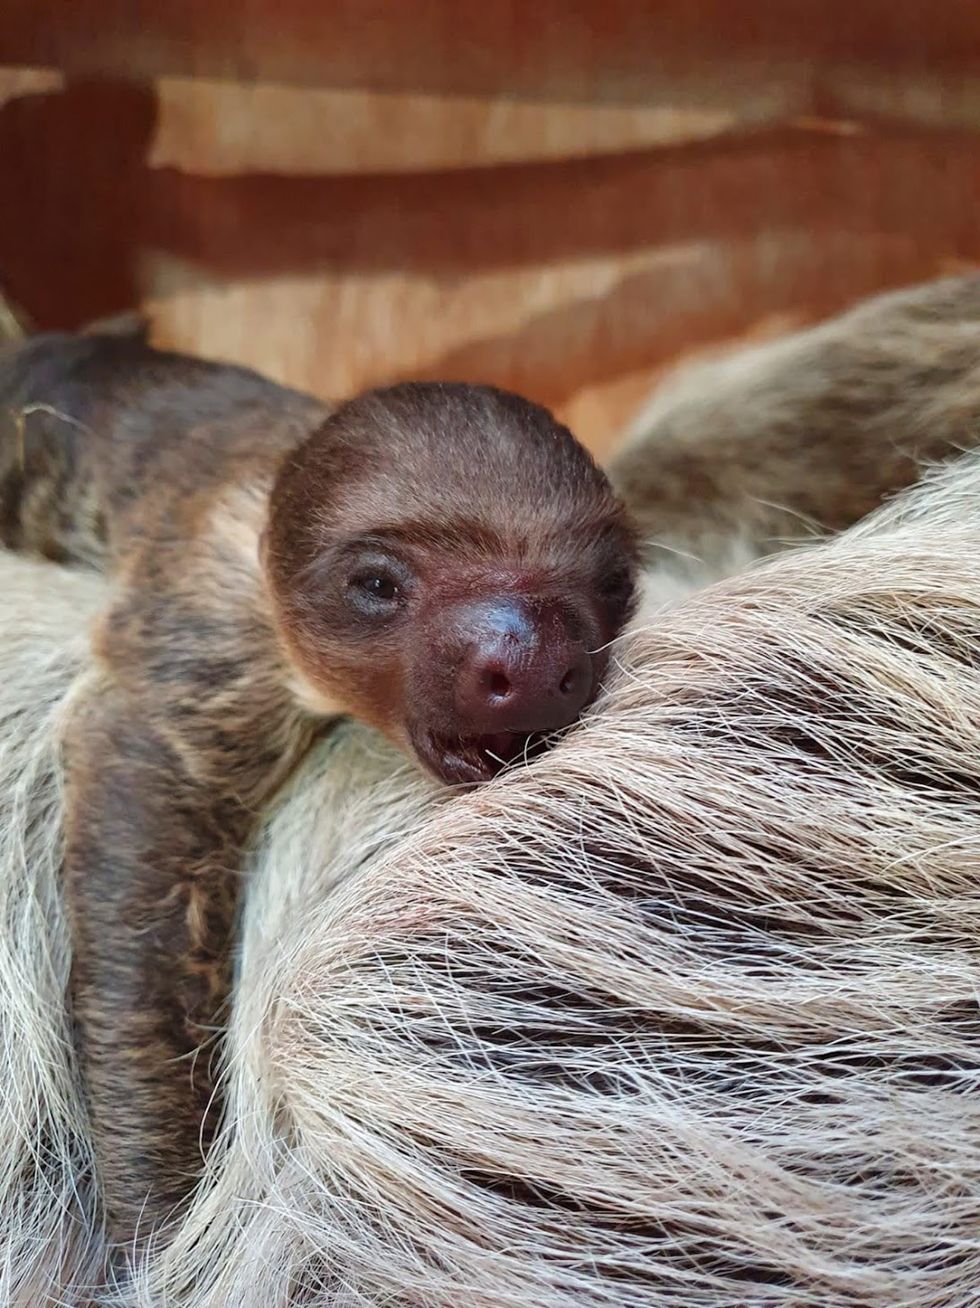 Baby sloth takes keepers by surprise at zoo